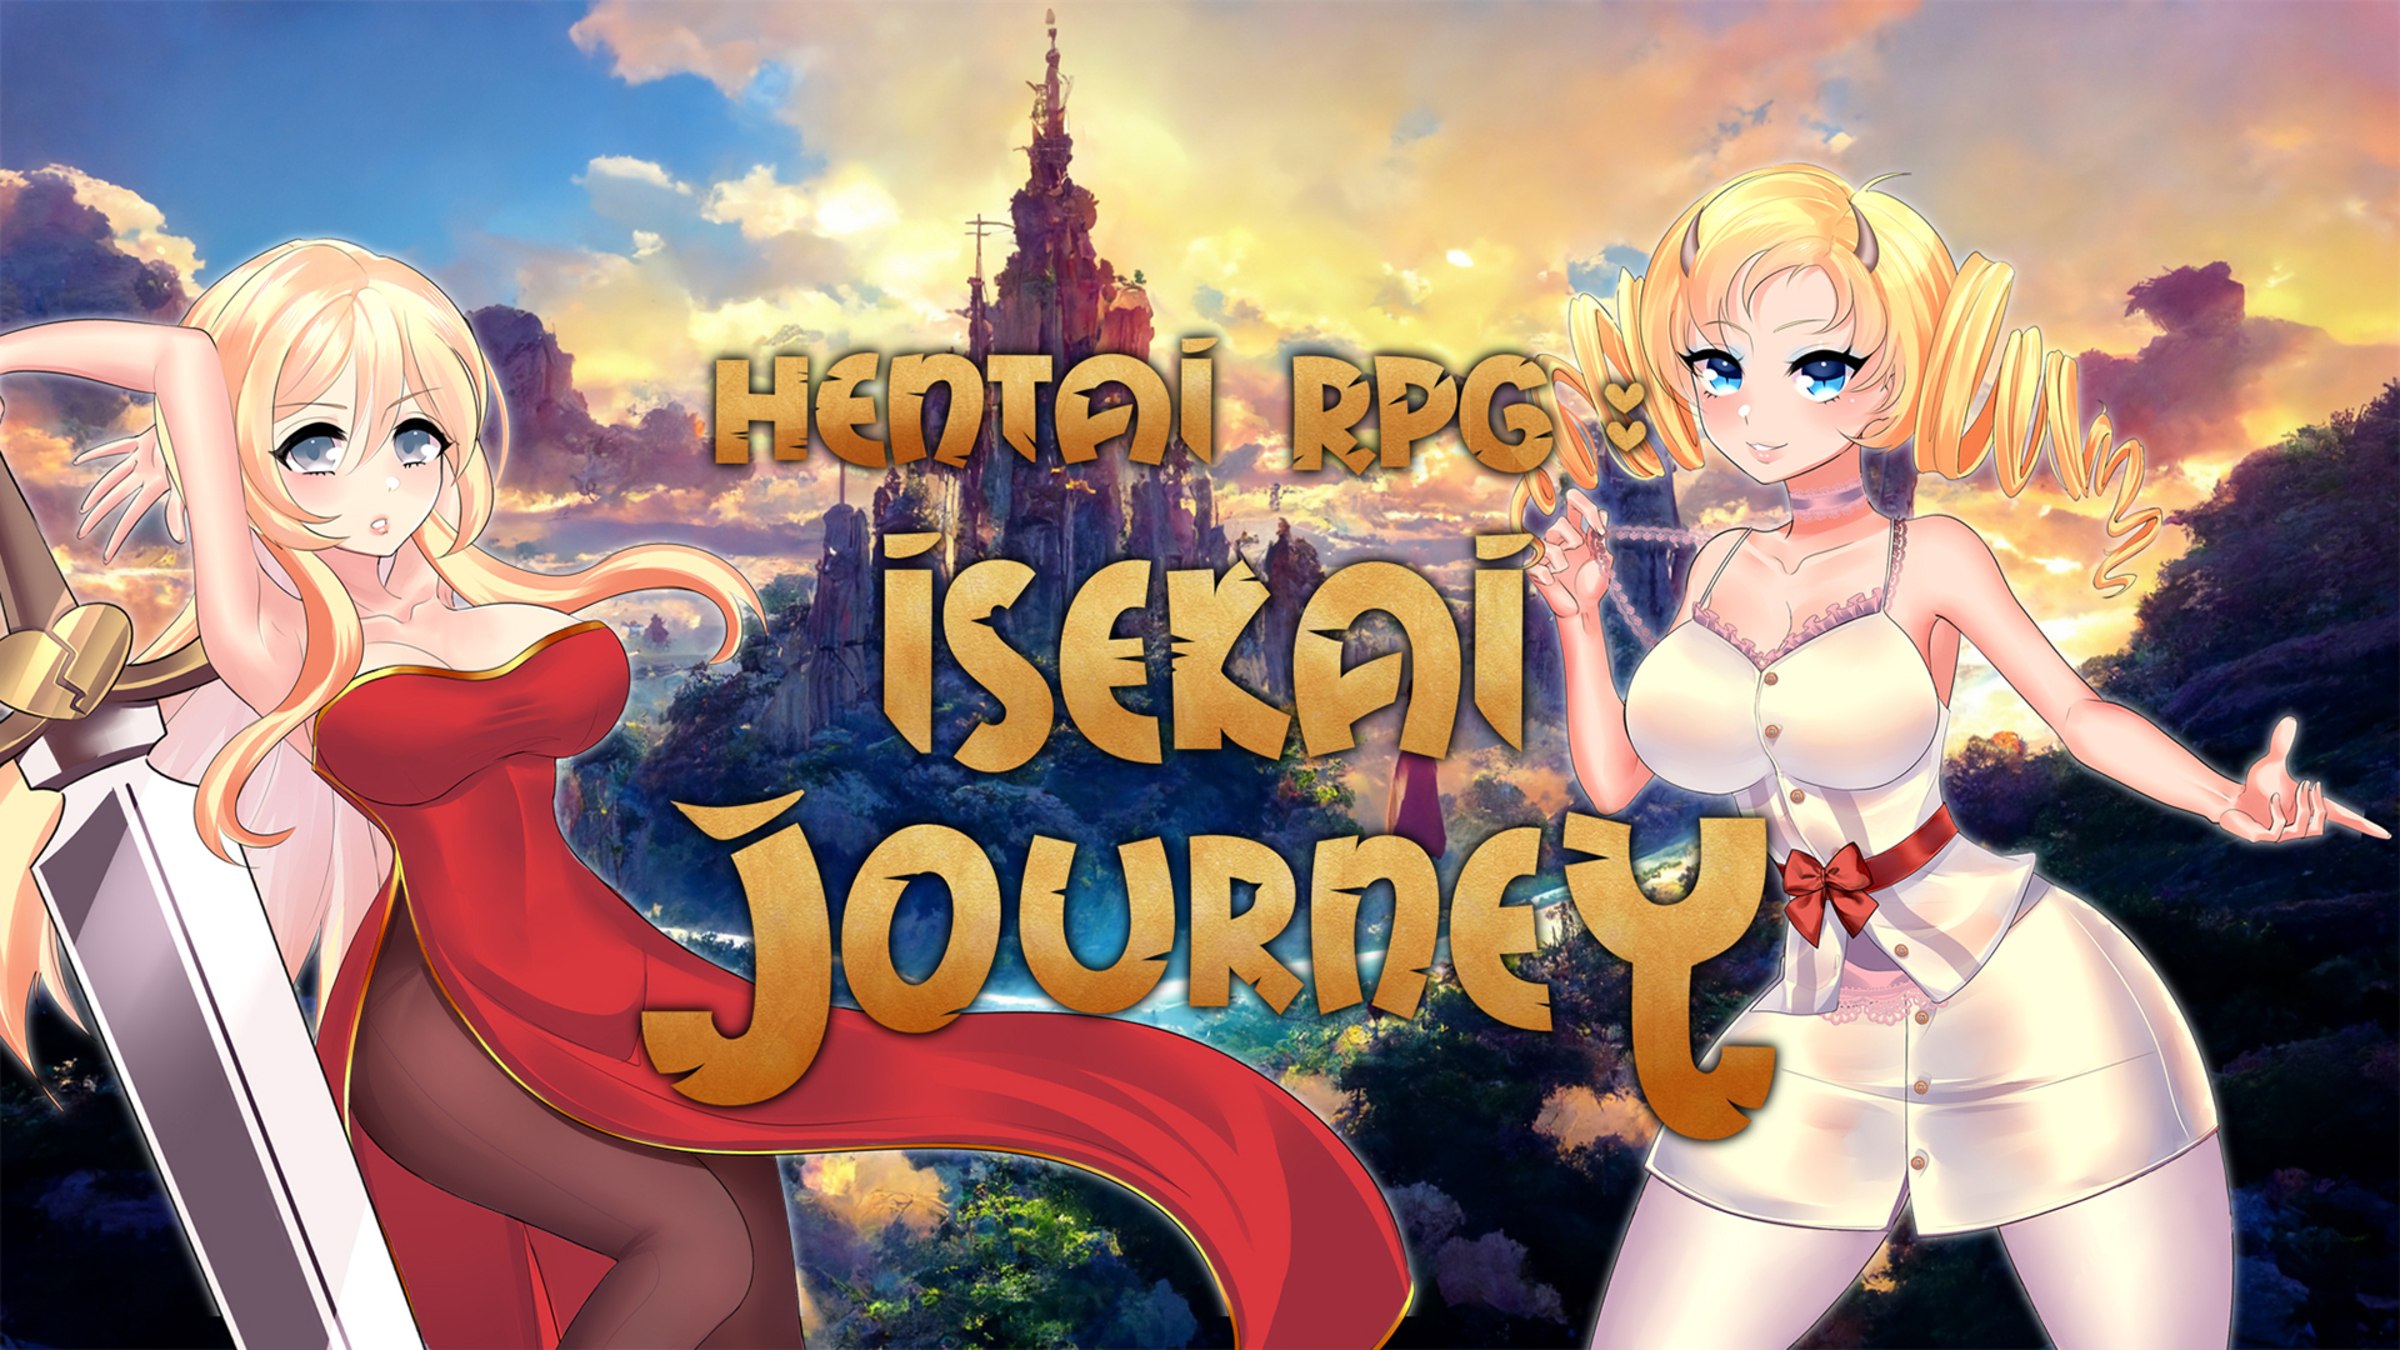 Hentai RPG: Isekai Journey for Nintendo Switch - Nintendo Official Site